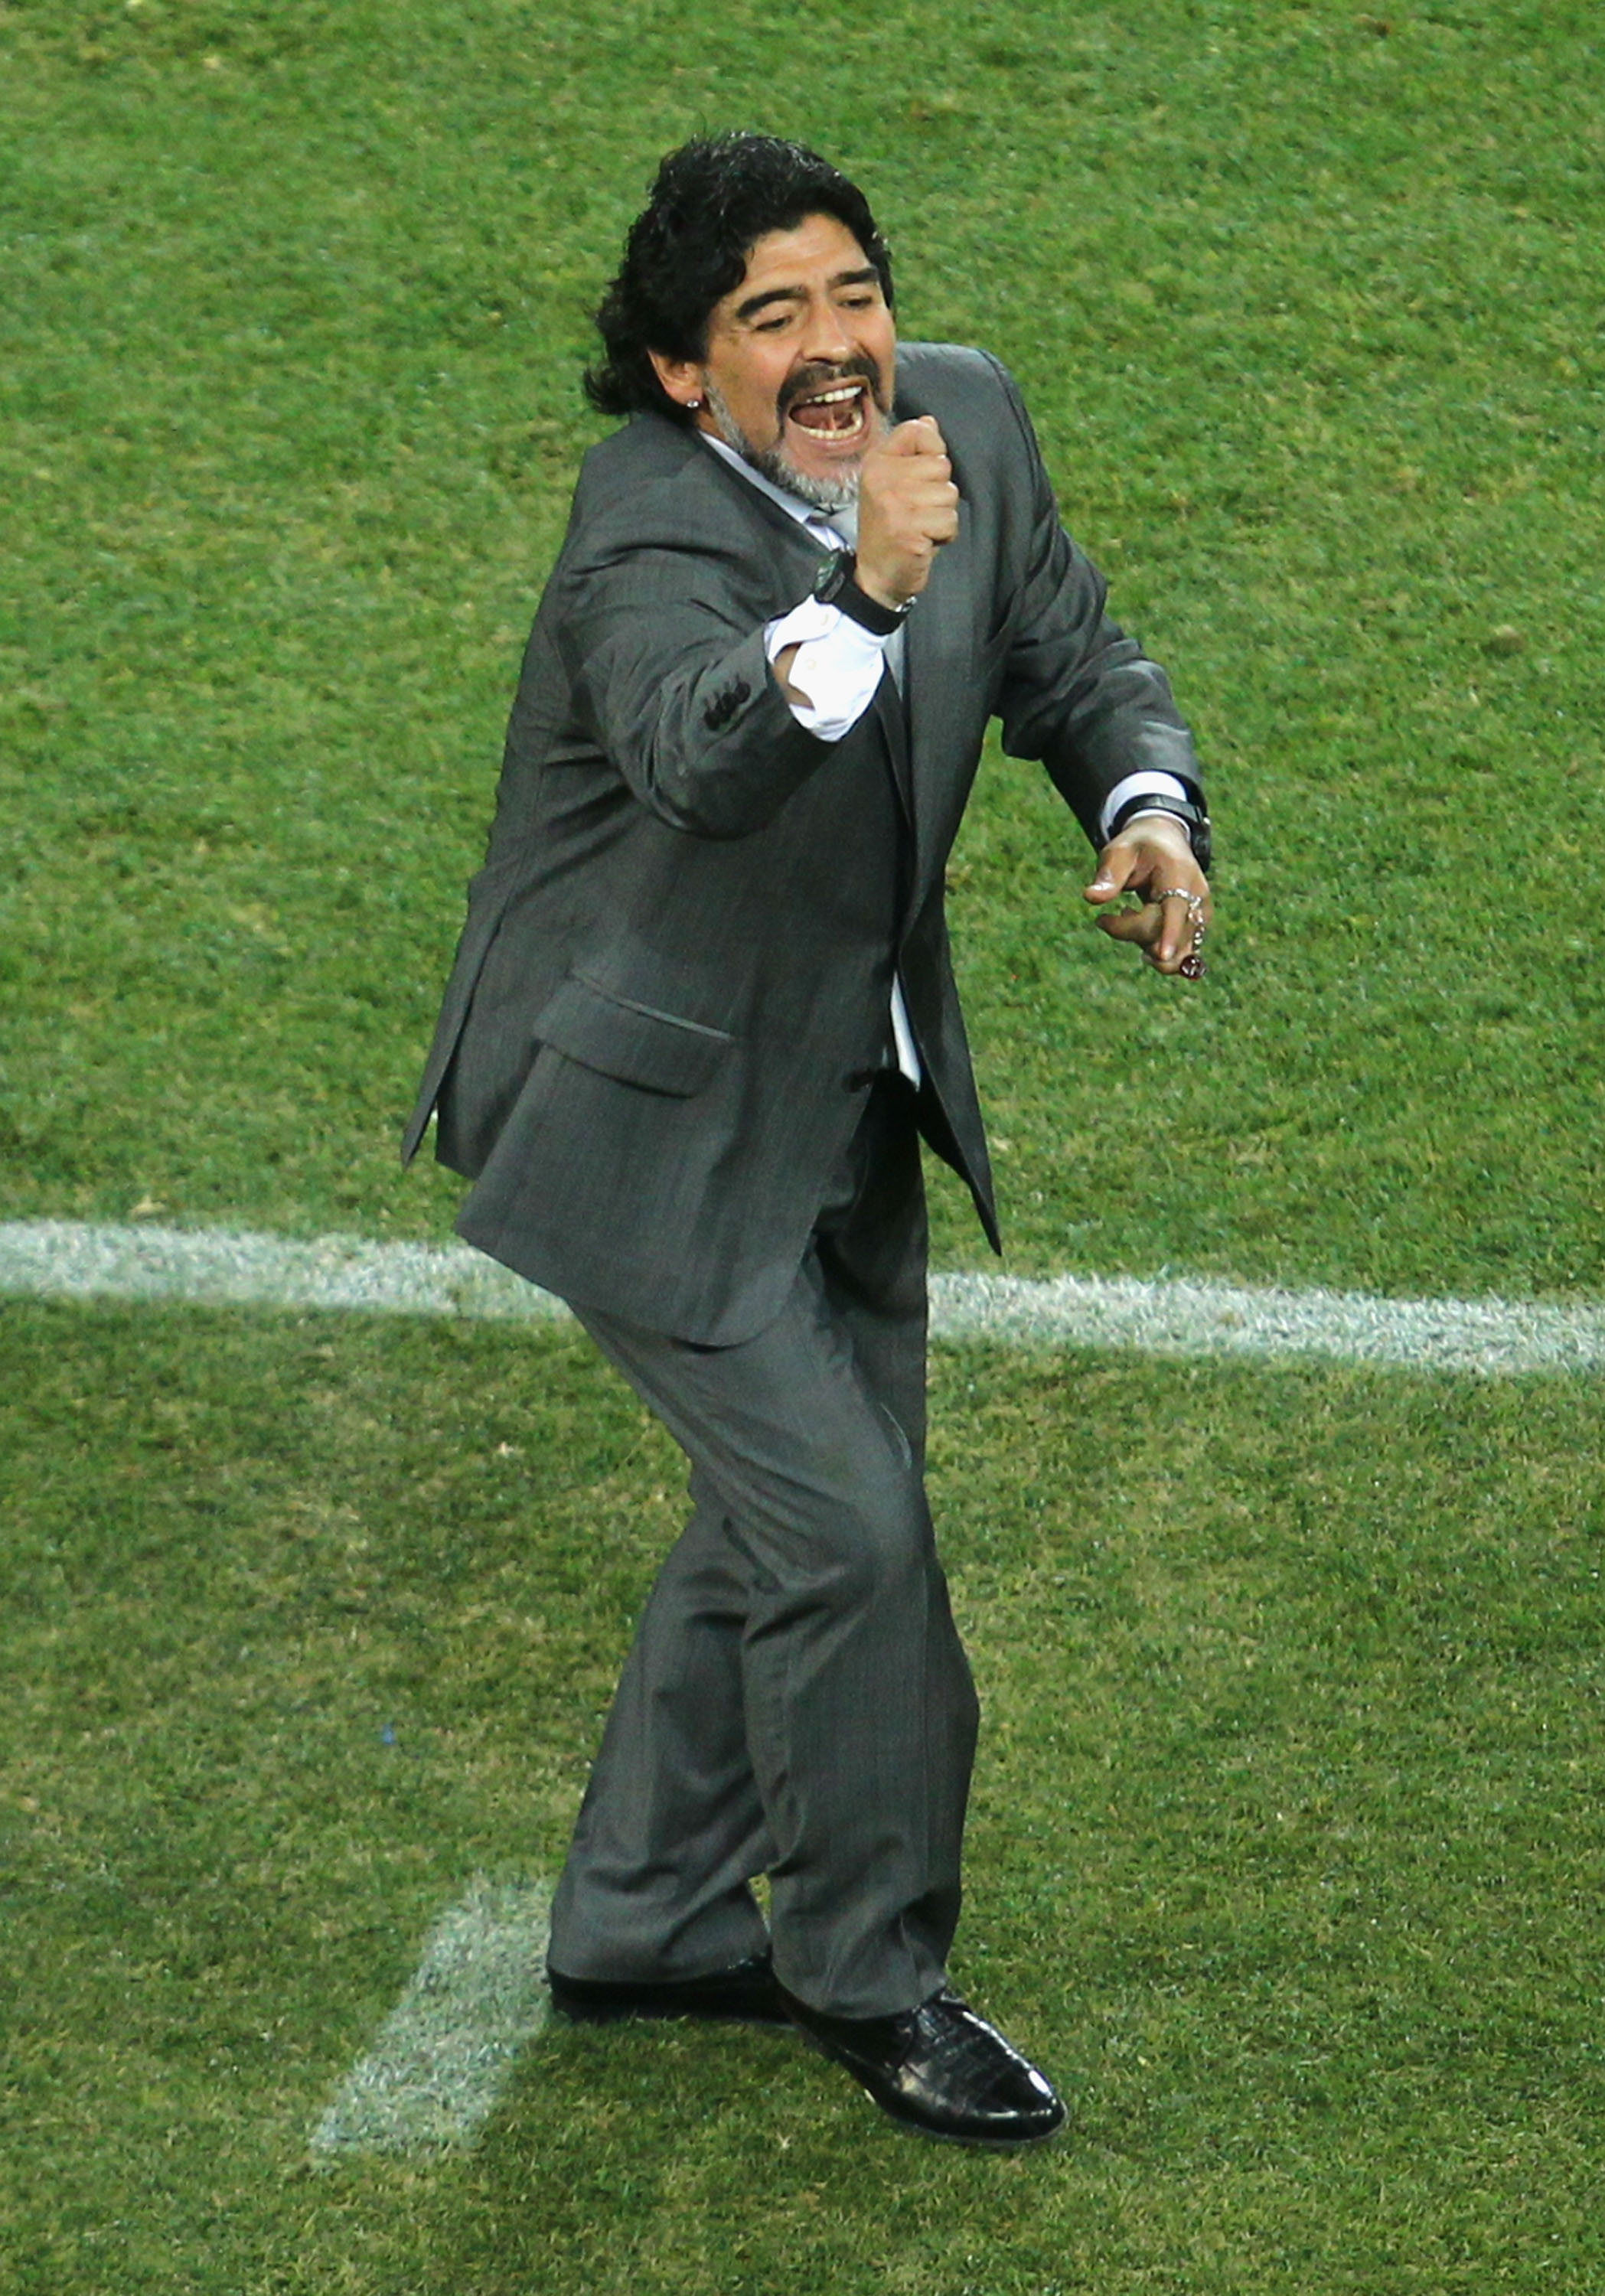 JOHANNESBURG, SOUTH AFRICA - JUNE 27:  Diego Maradona head coach of Argentina gestures during the 2010 FIFA World Cup South Africa Round of Sixteen match between Argentina and Mexico at Soccer City Stadium on June 27, 2010 in Johannesburg, South Africa.